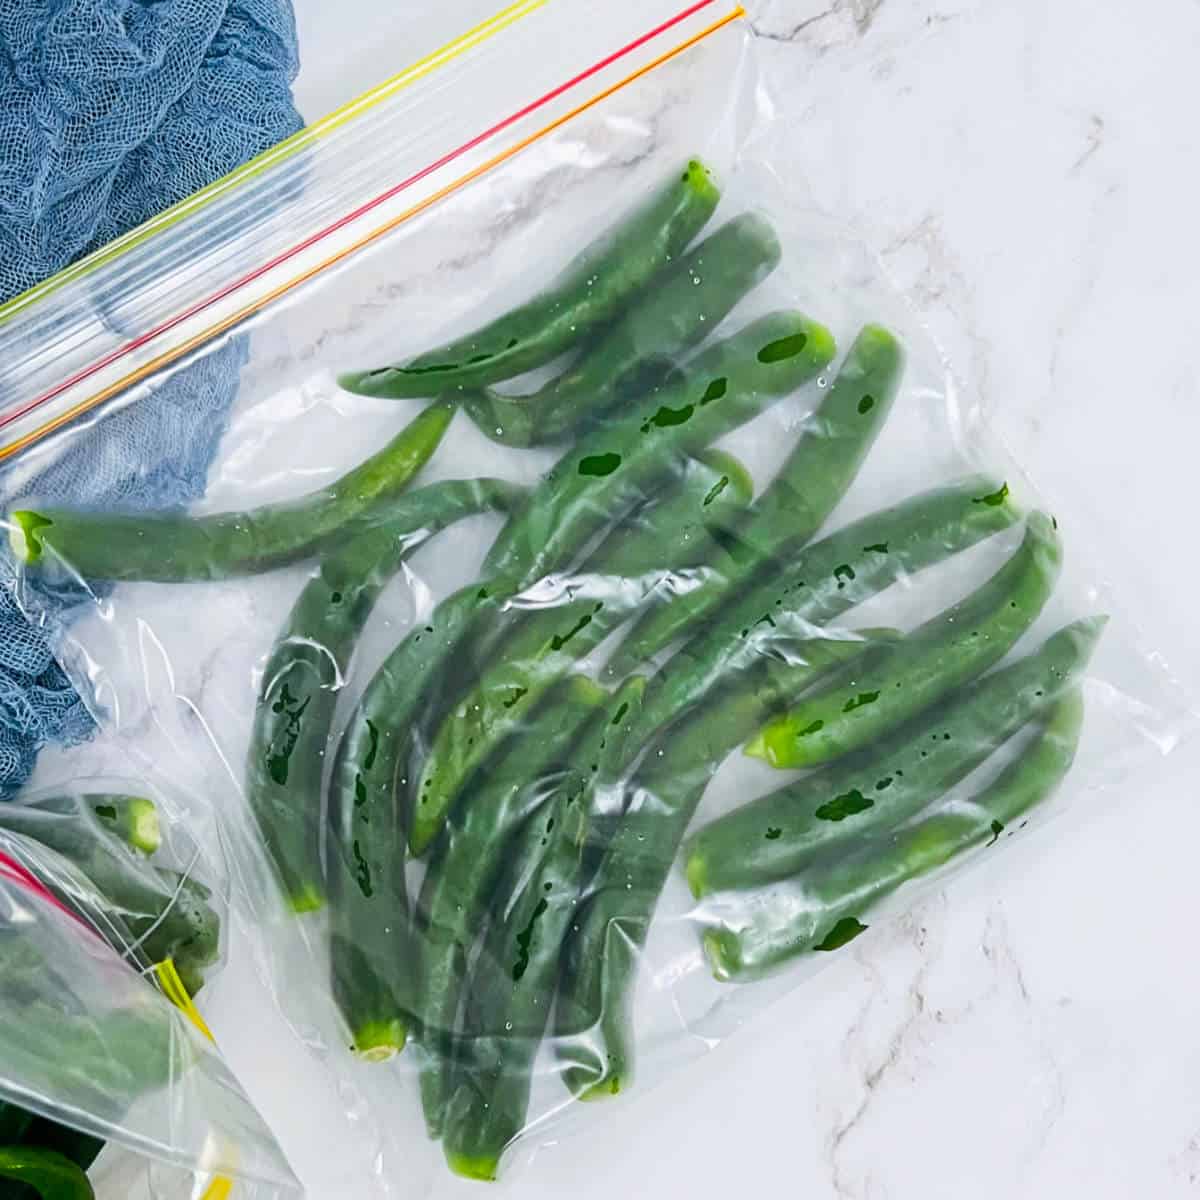 Green chili peppers placed in ziplock bag.